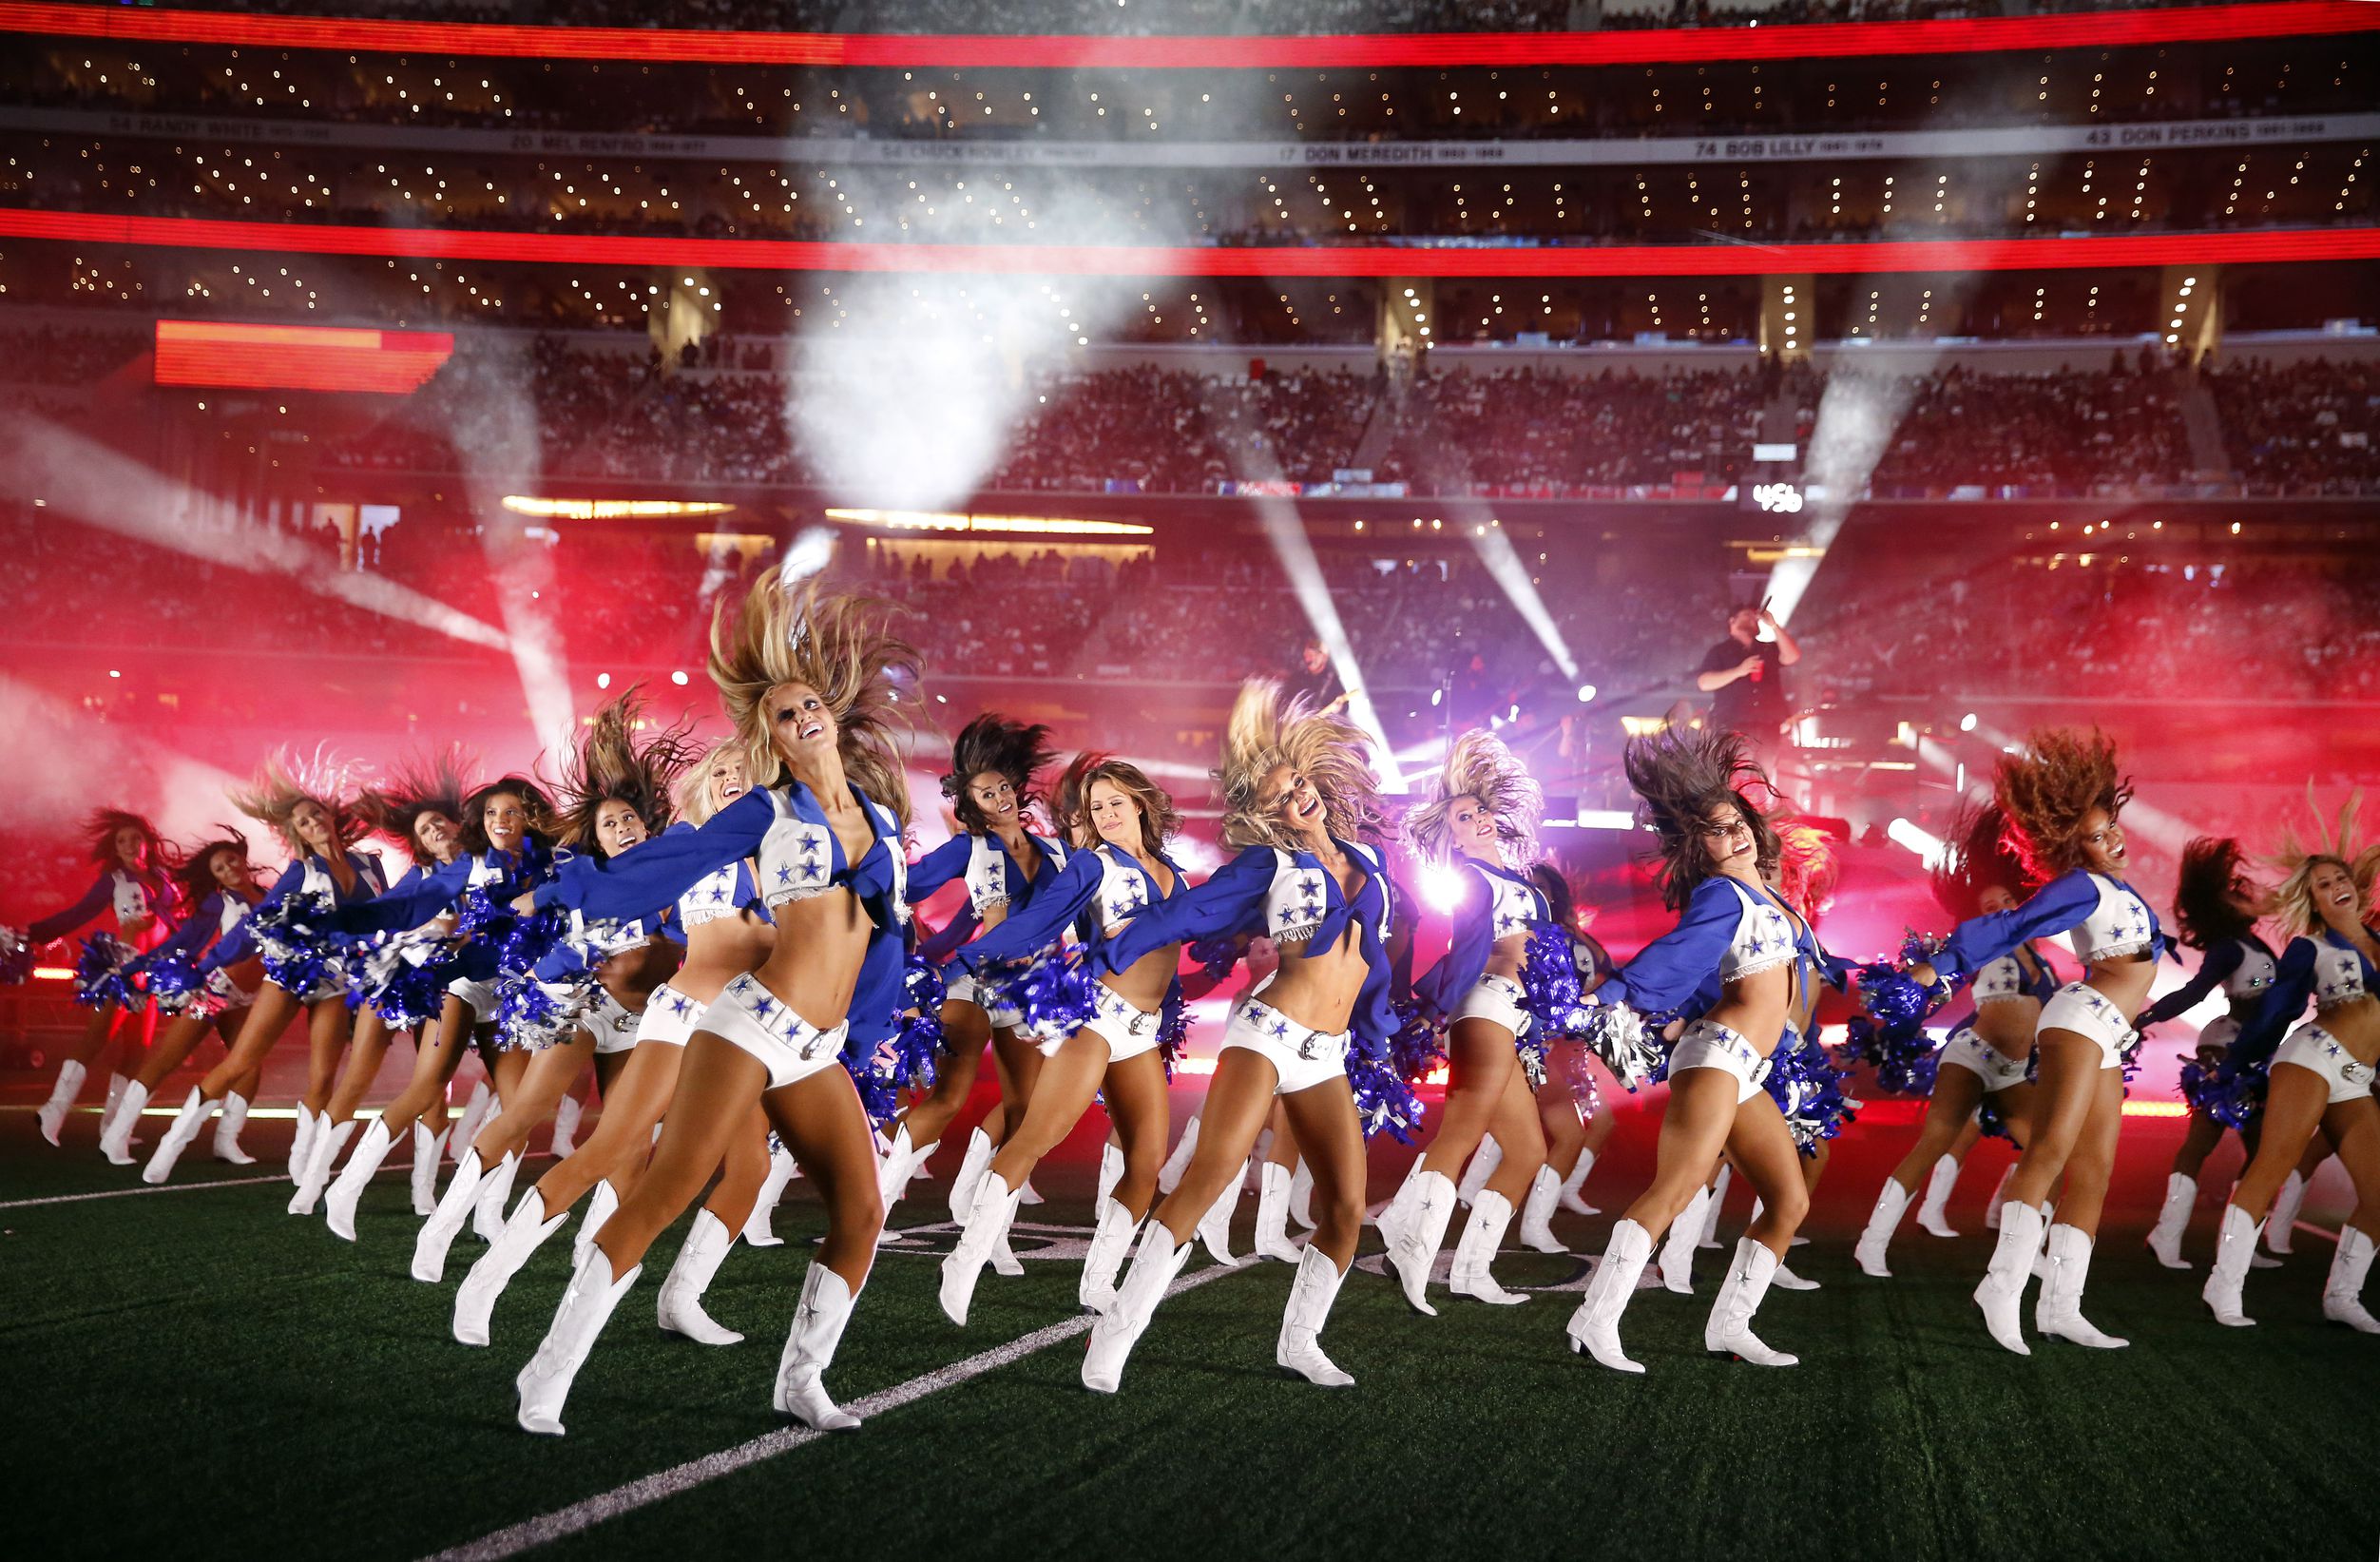 The story of the Dallas Cowboys Cheerleaders is fun, sexy and